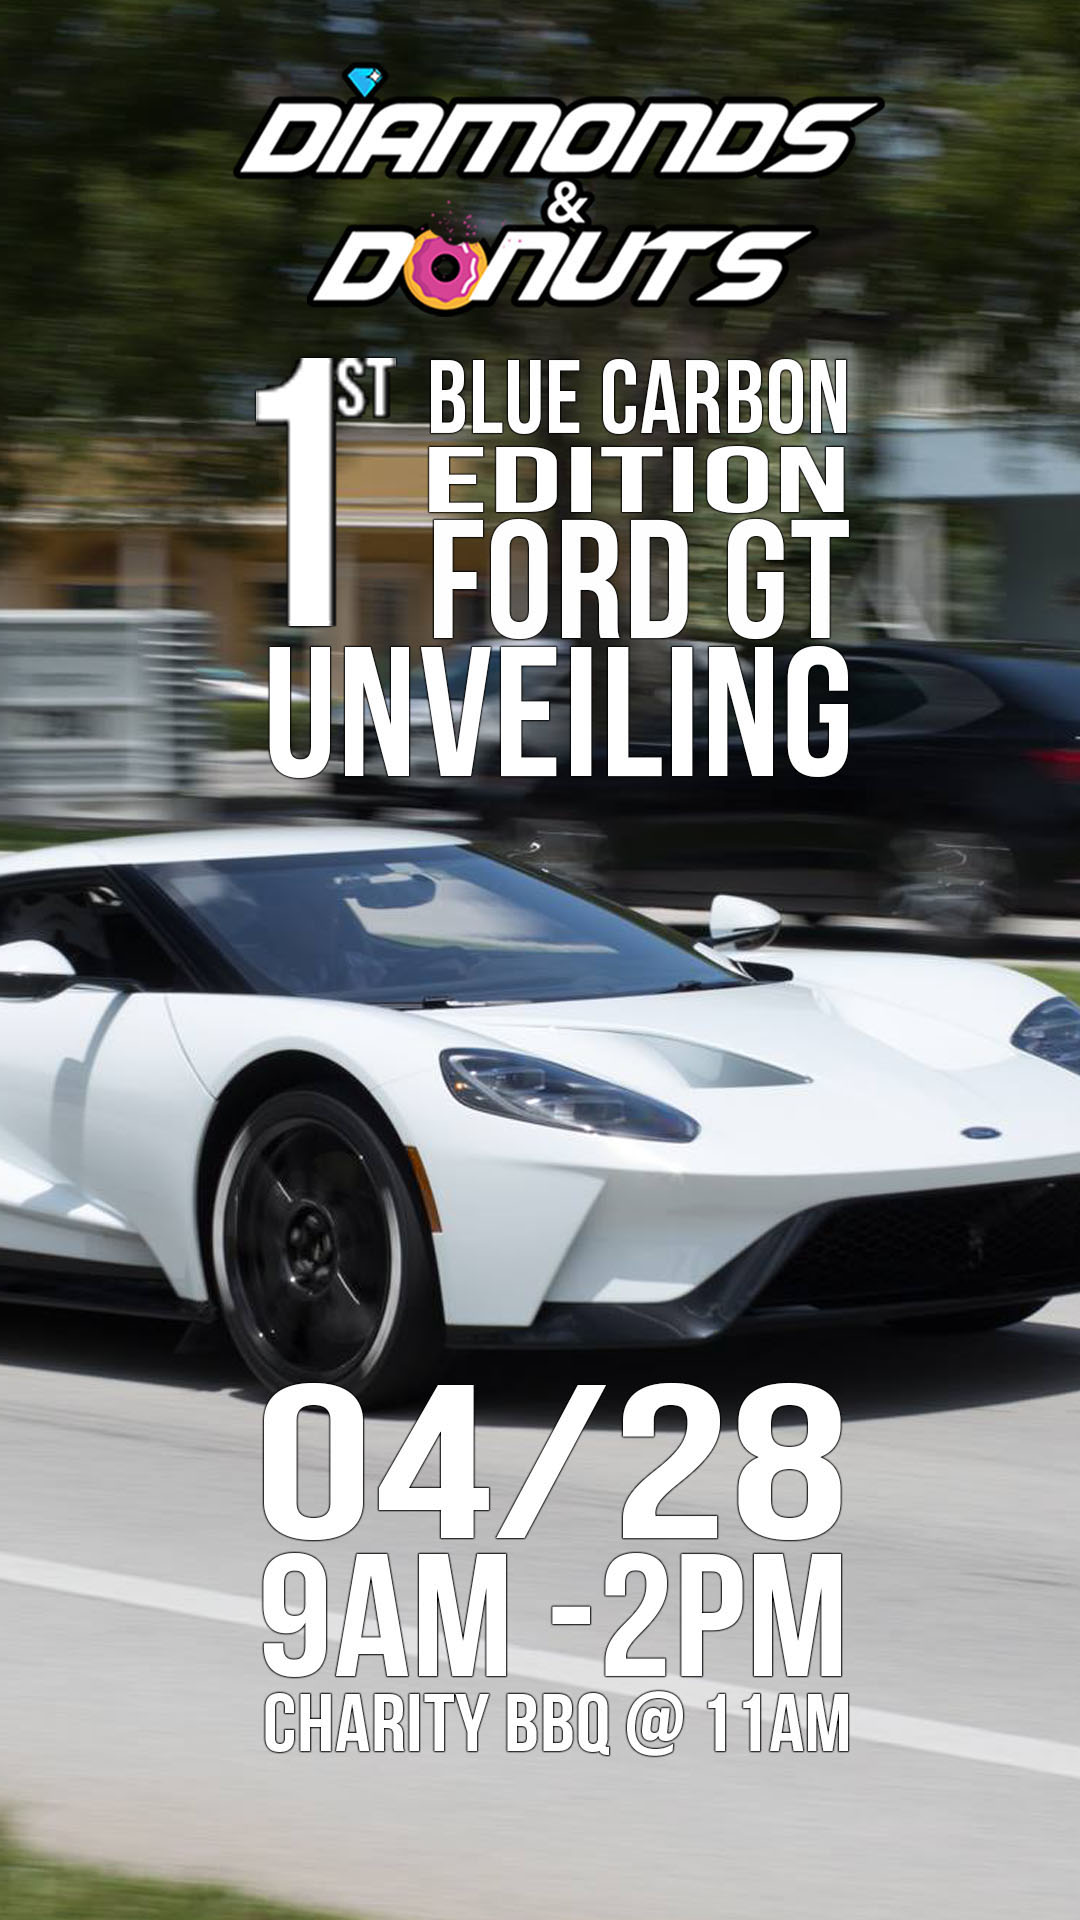 Diamonds & Donuts Ford GT edition, Palm Beach, Florida, United States